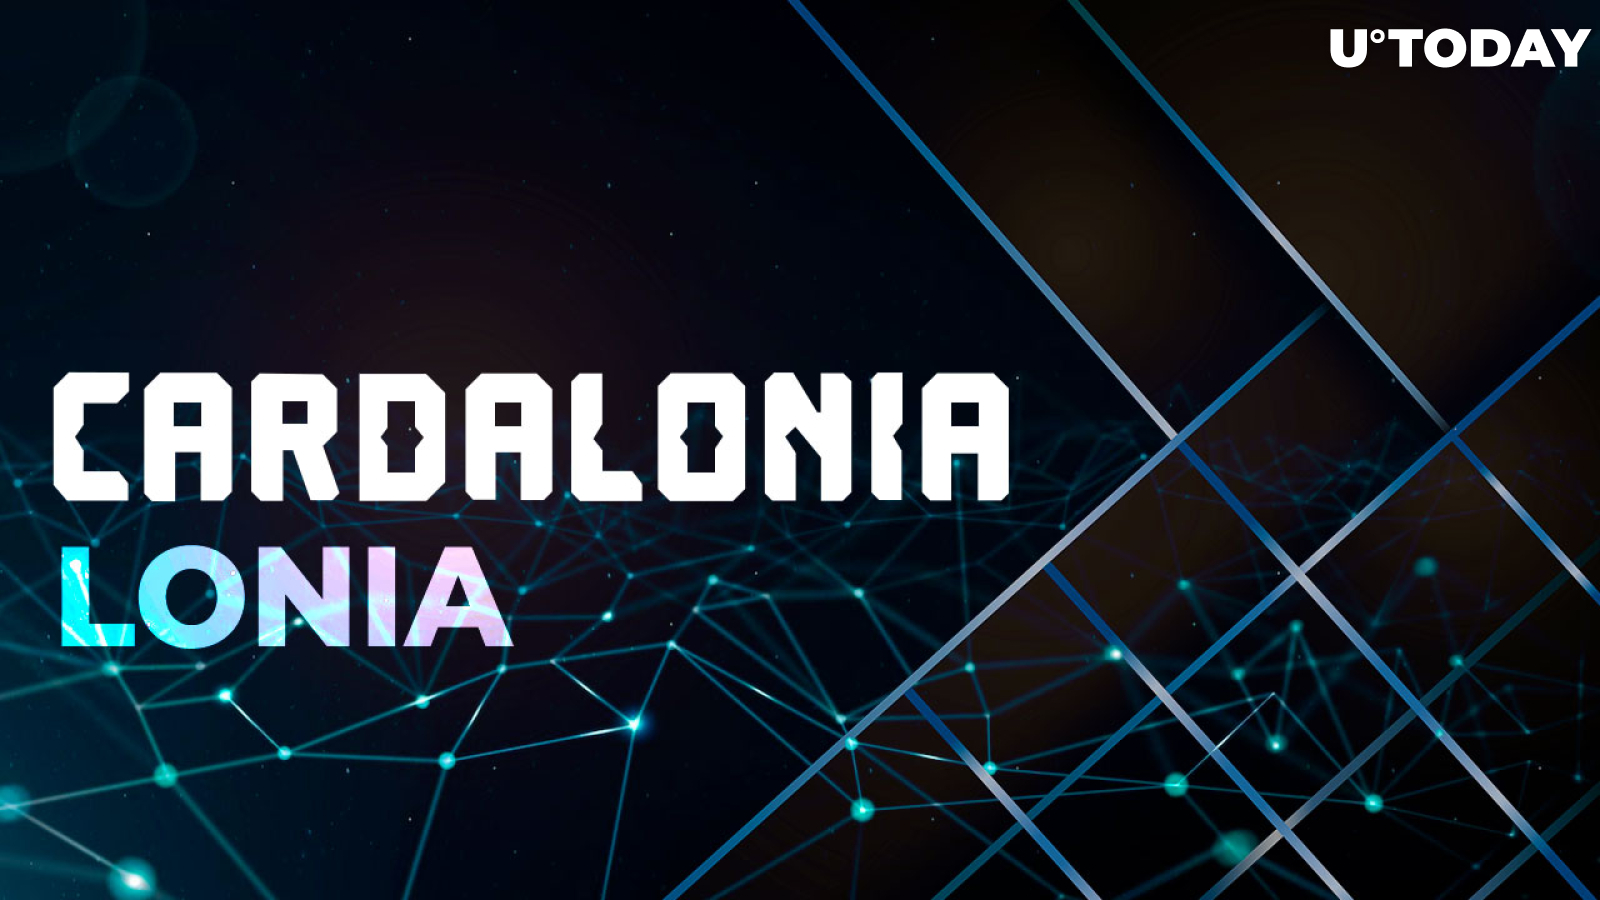 Cardalonia Launches Early Bird Campaign for LONIA Token; NFT Sale in Cards